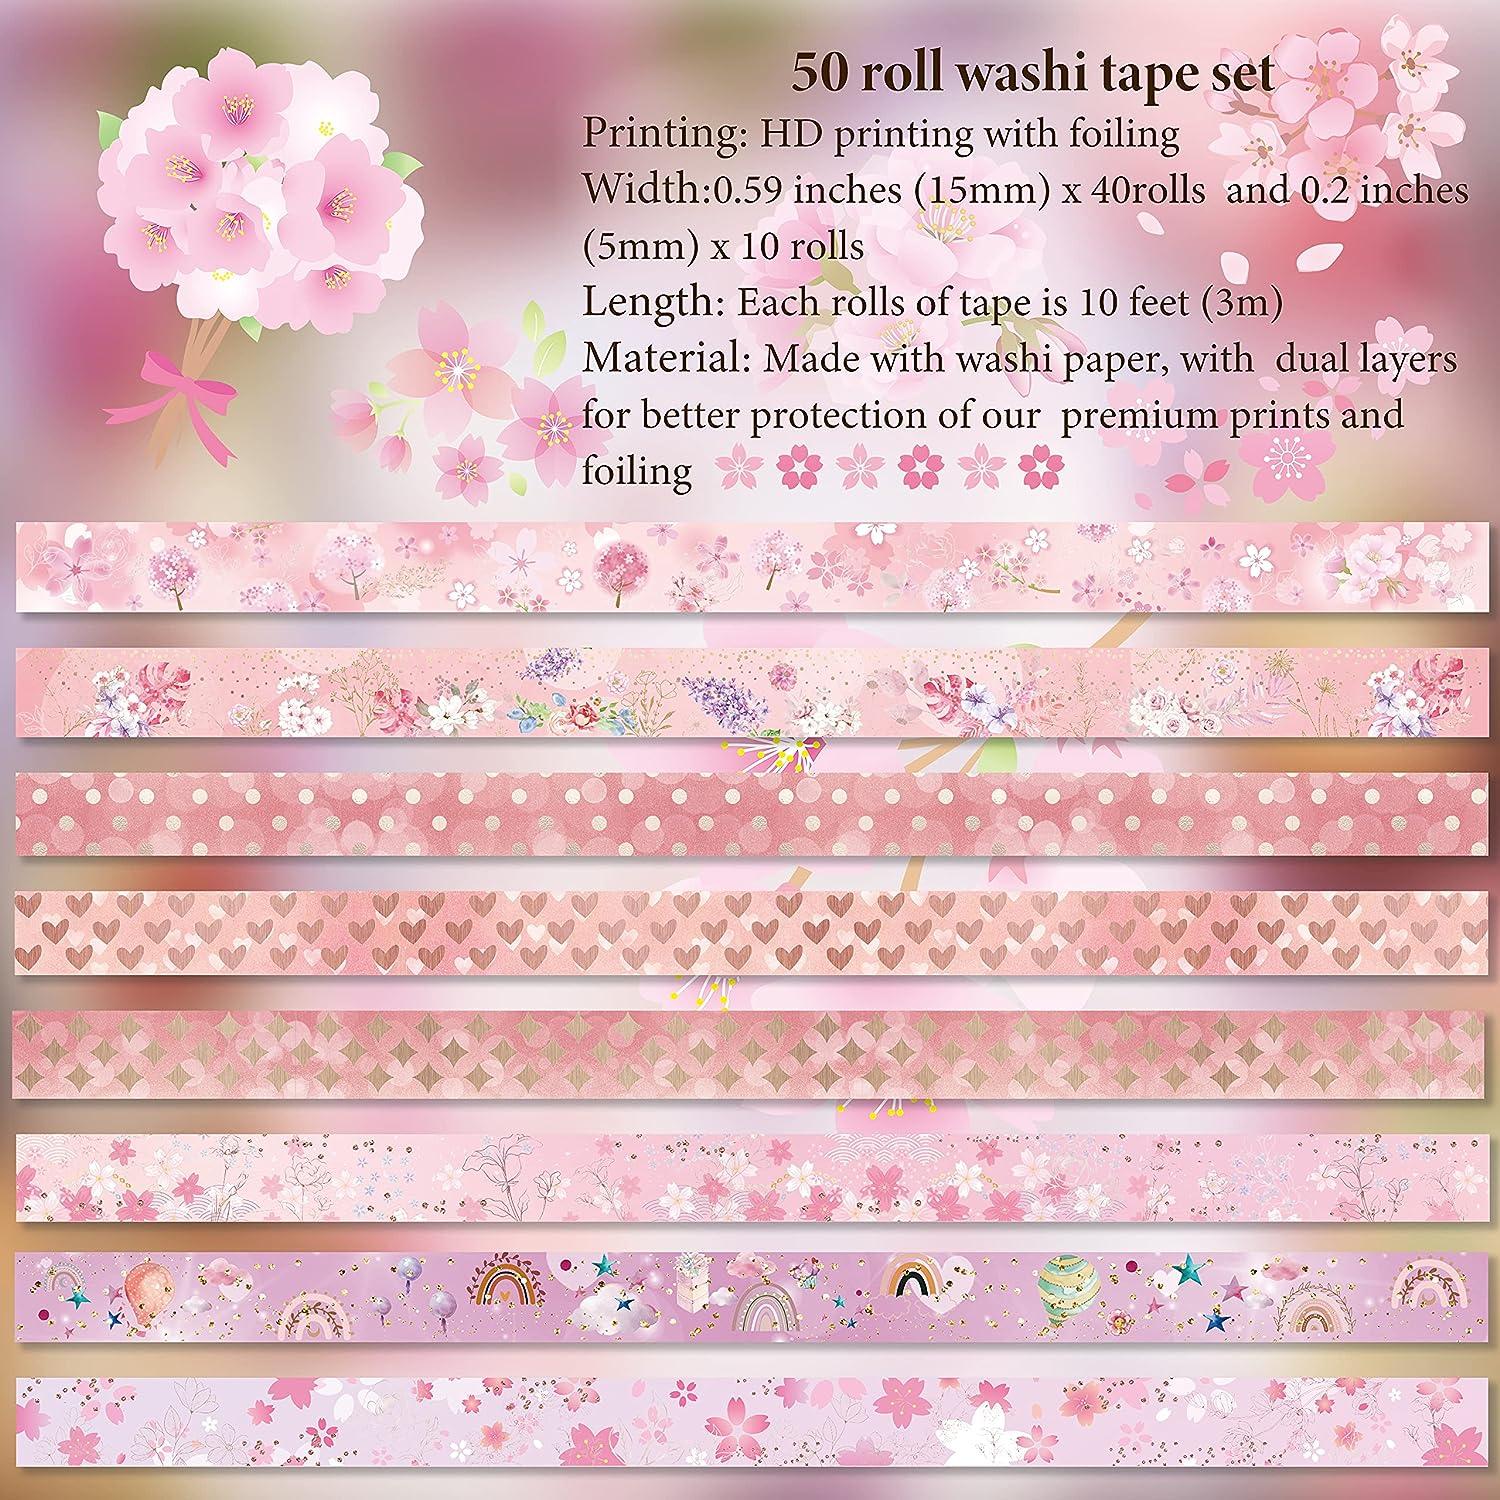  slapaflife Cute Washi Tape Set 50 Rolls Kawaii Animals Gold  Foil Decorative Masking Tape for Scrapbook,Washi Tape for Journaling, Scrapbooking Supplies,Party Decorations,Bullet Journals : Arts, Crafts &  Sewing